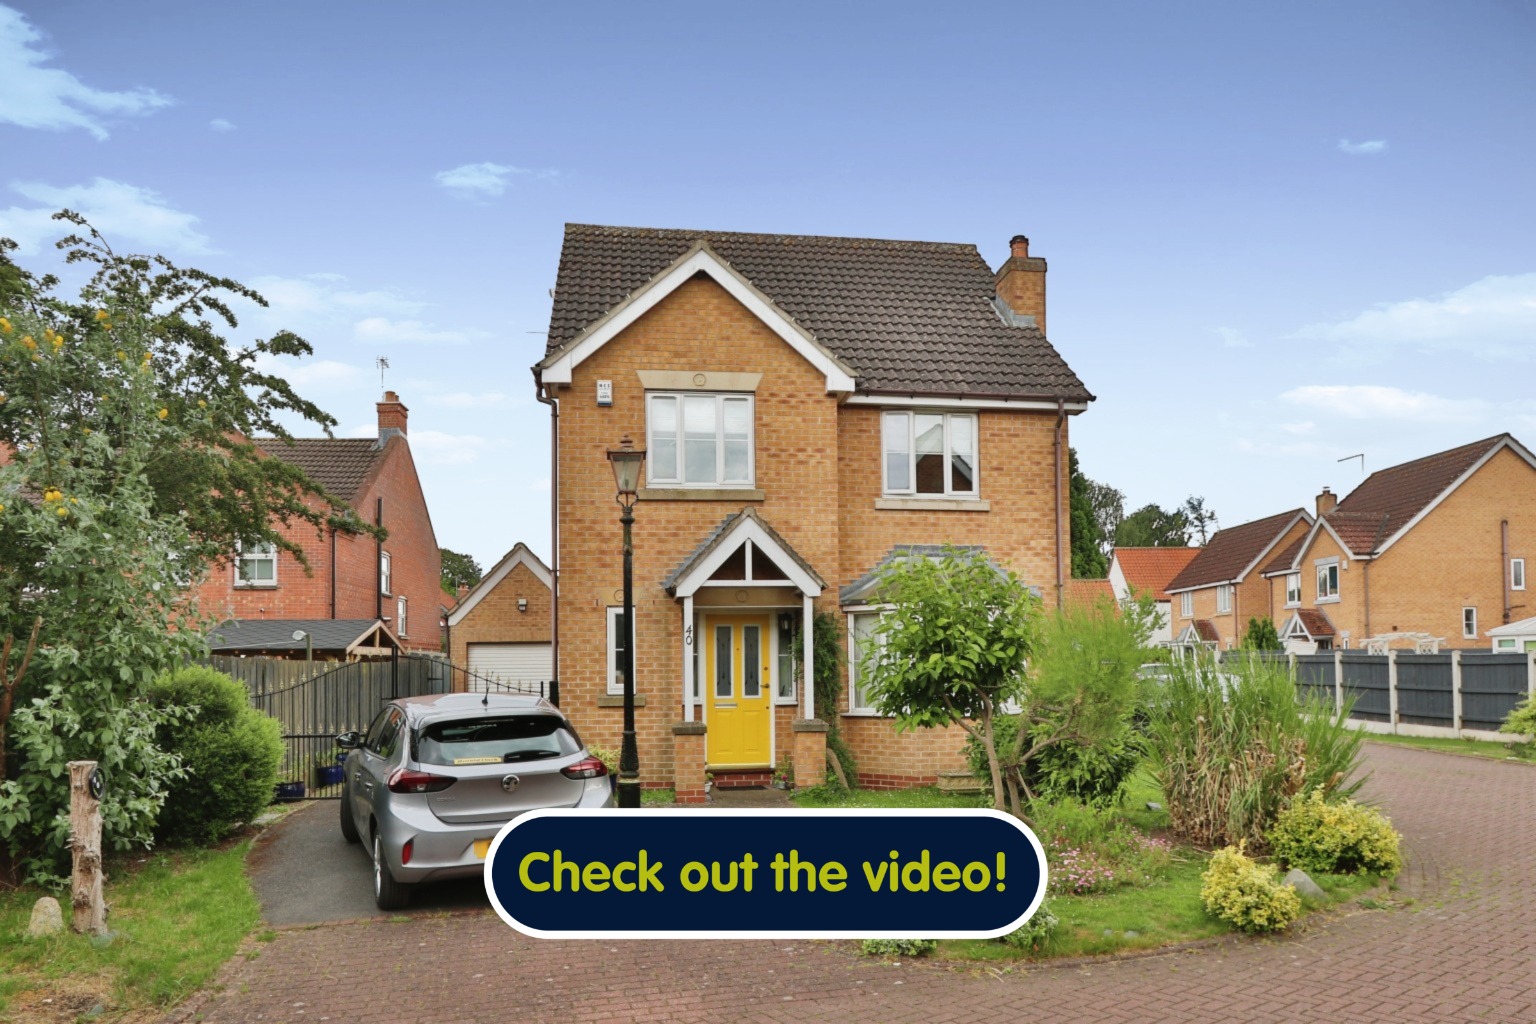 4 bed detached house for sale in St Pauls Way, Beverley - Property Image 1